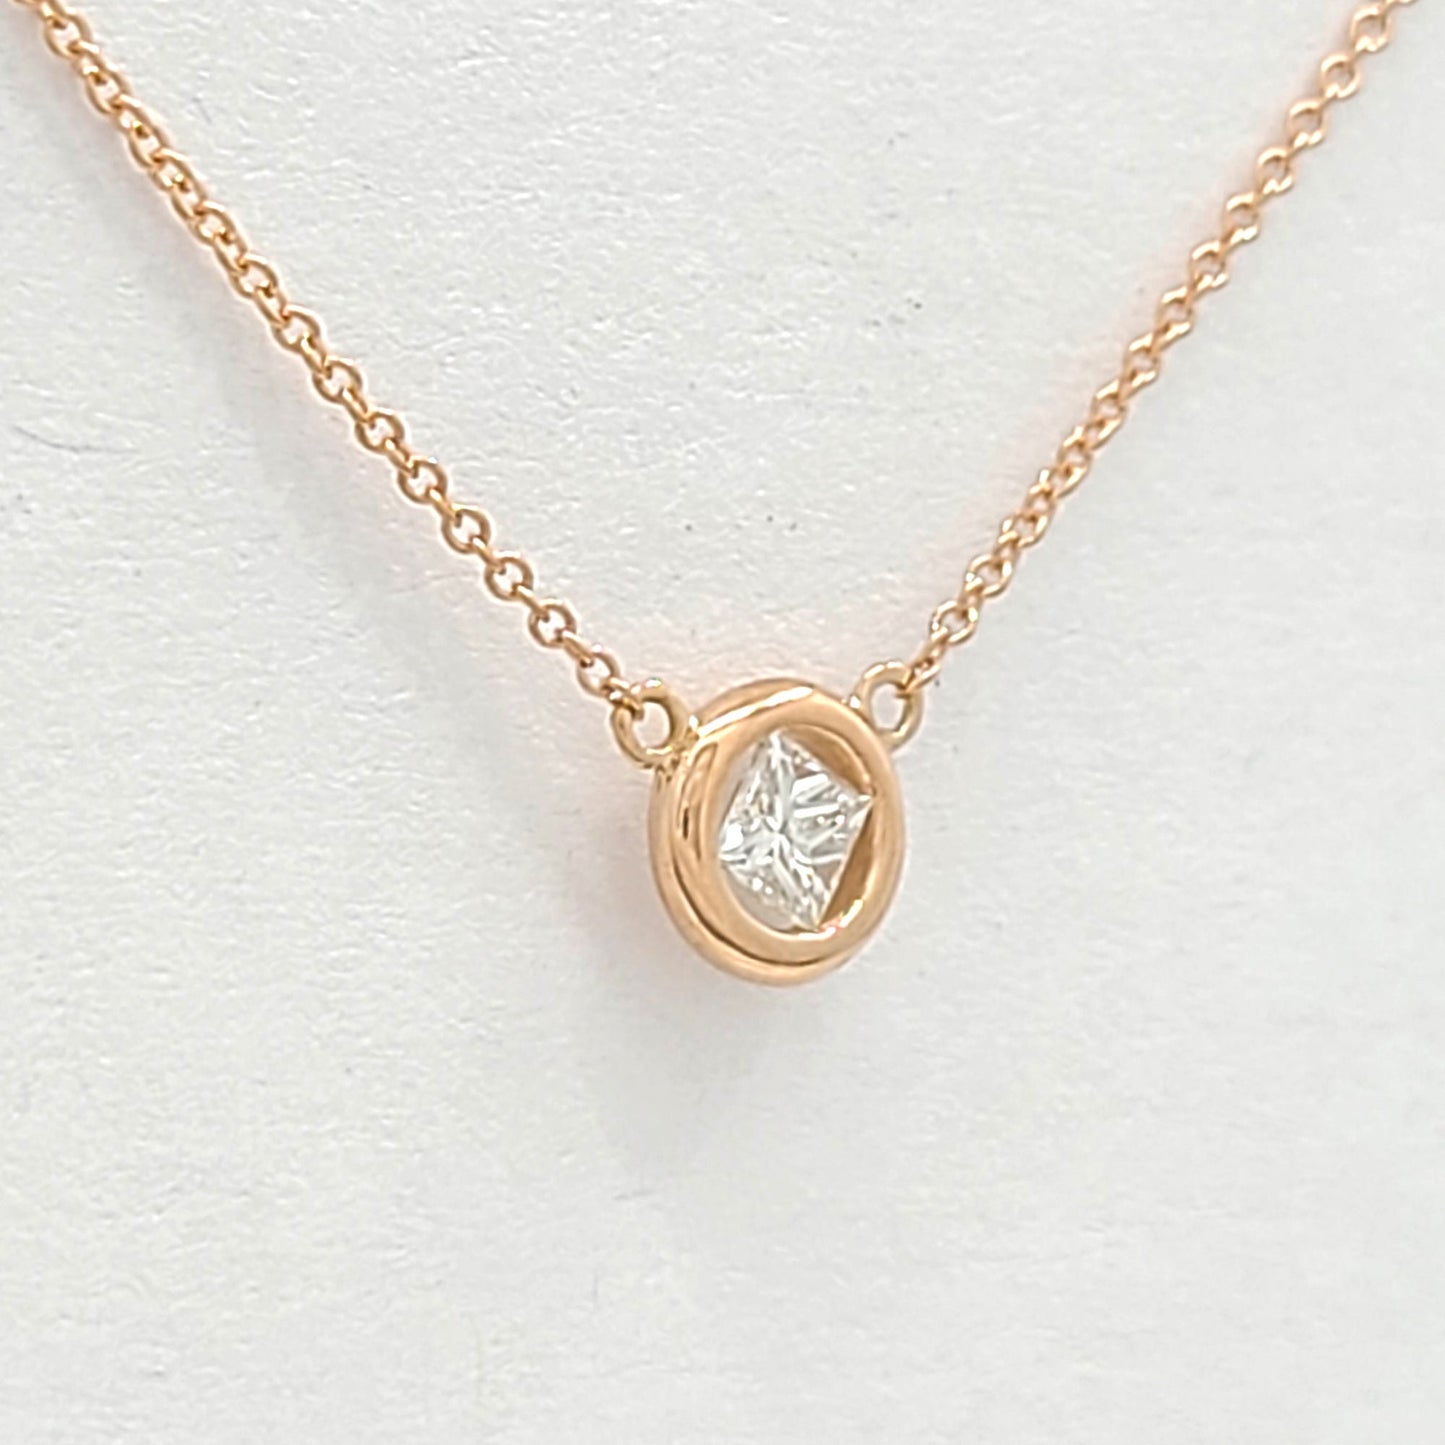 Princess Cut Diamond Necklace / Princess Cut Solitaire / 0.15CT Diamond Bezel Necklace / Diamond necklace / Necklace 14k Rose Gold / Gift for Her